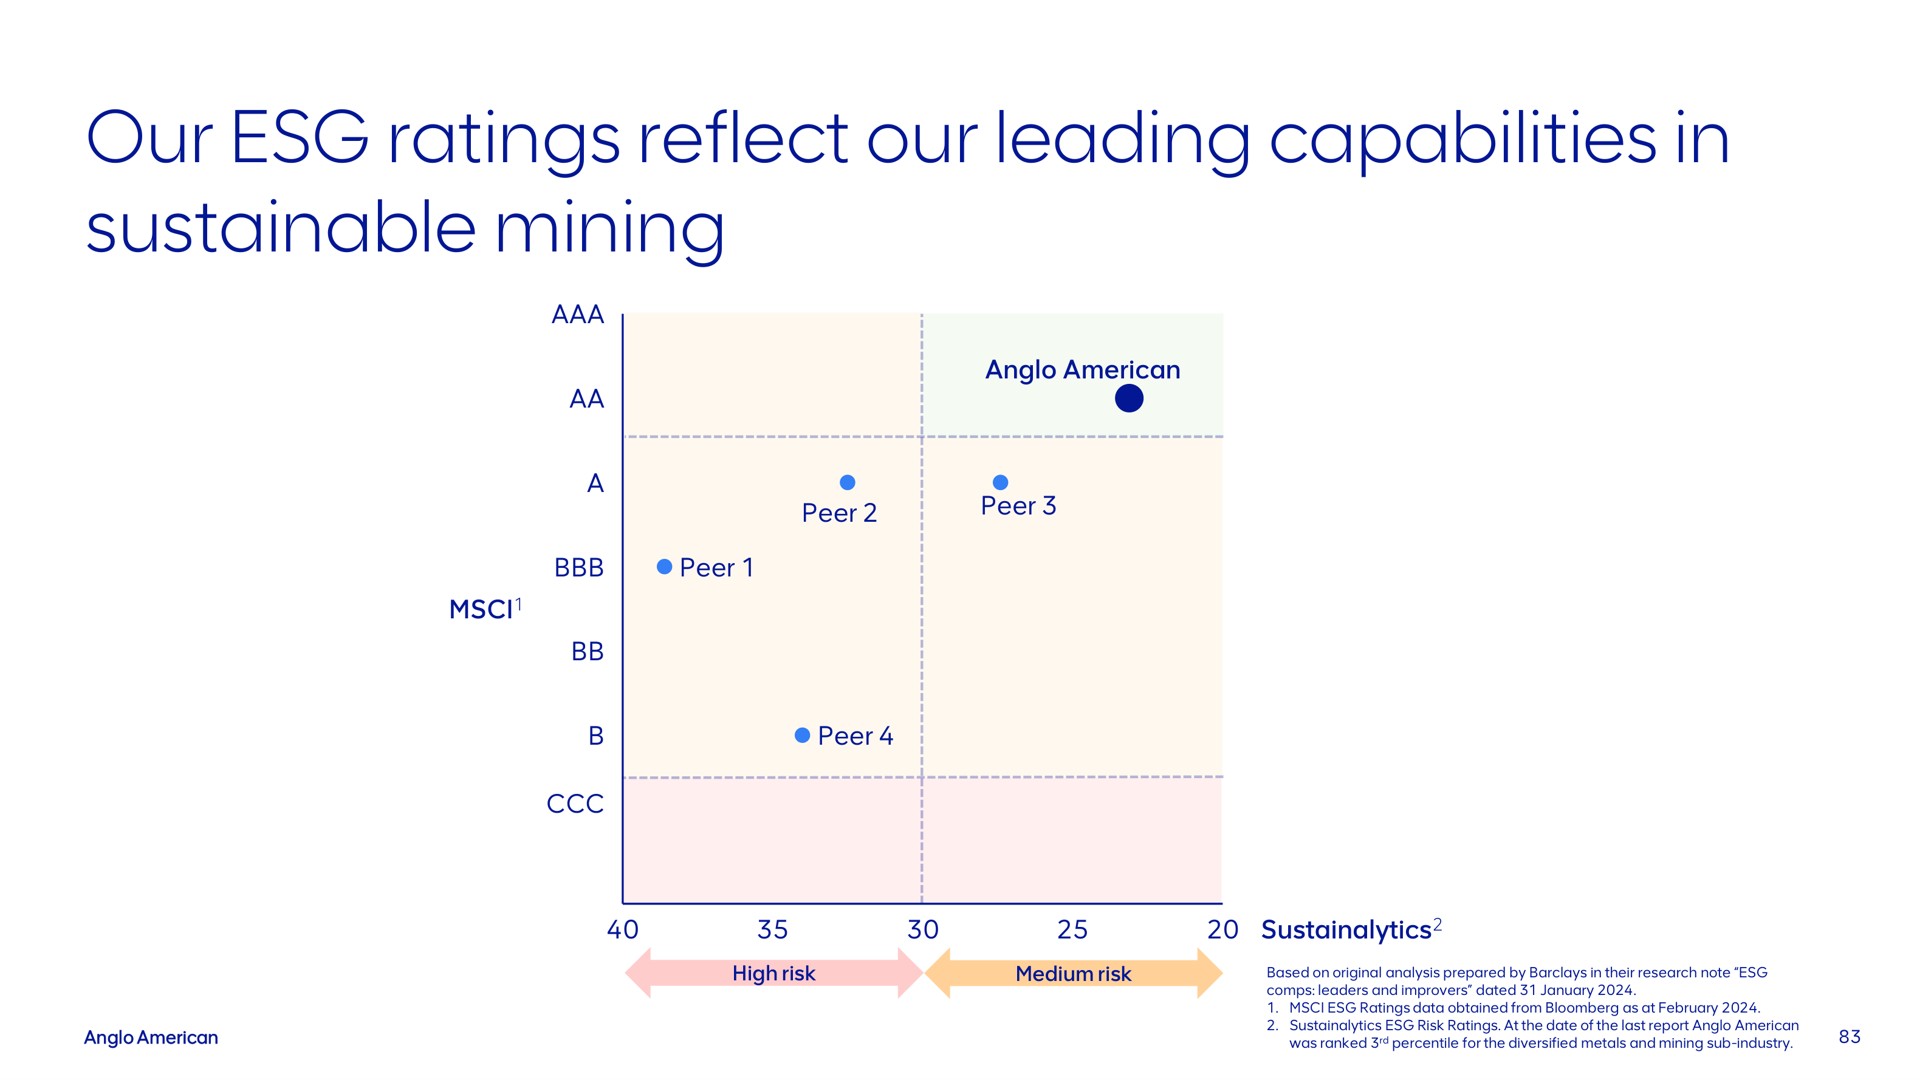 our ratings reflect our leading capabilities in sustainable mining | AngloAmerican